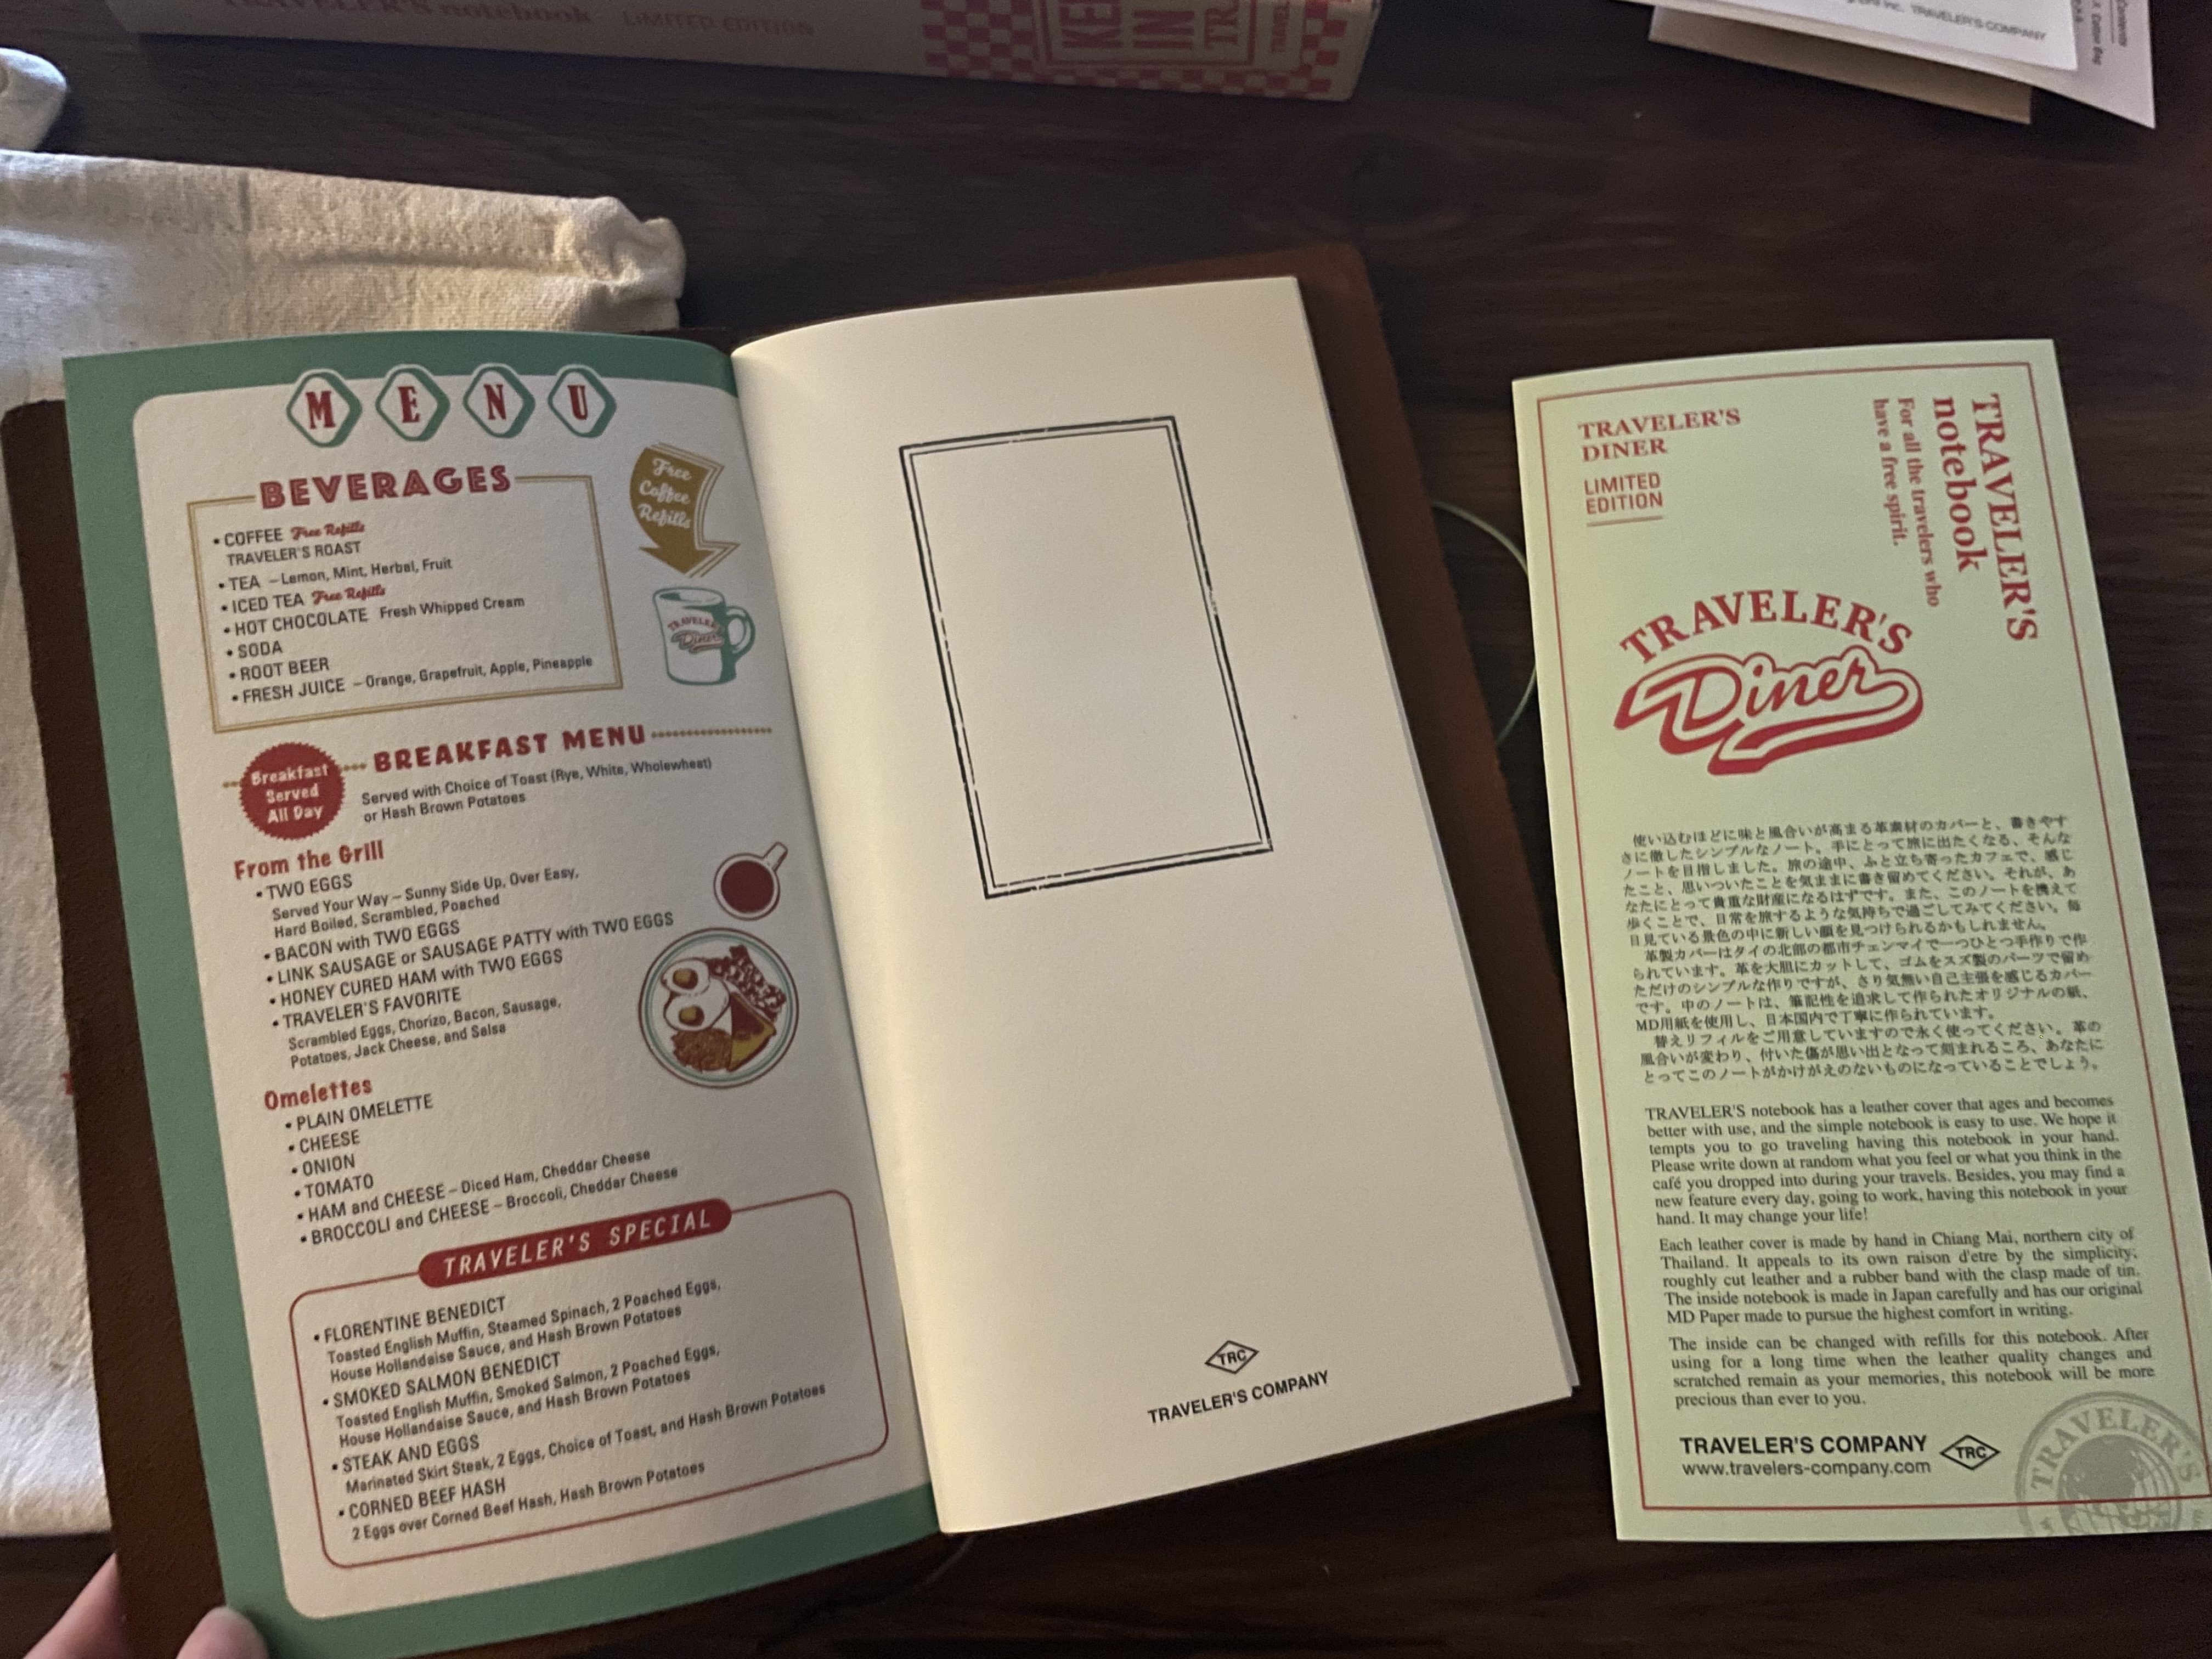 the left-side inner cover of the notebook, which shows an actual diner menu. this one shows various sections: beverages, the breakfast menu, and the specials